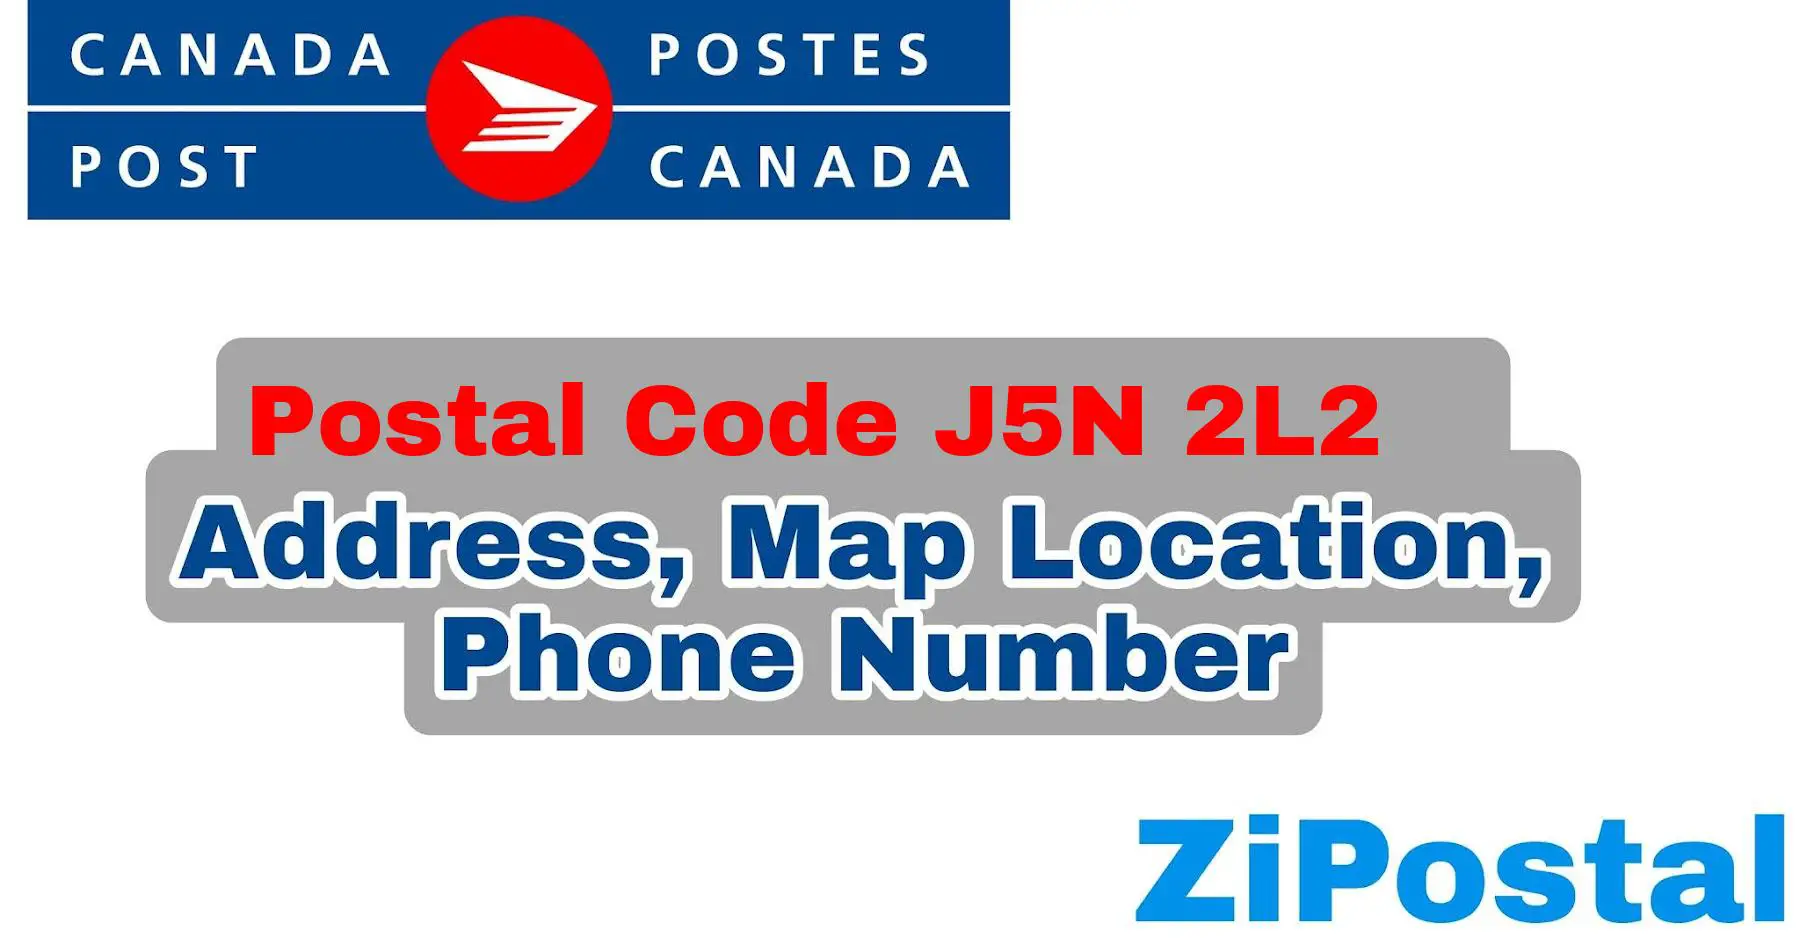 Postal Code J5N 2L2 Address Map Location and Phone Number